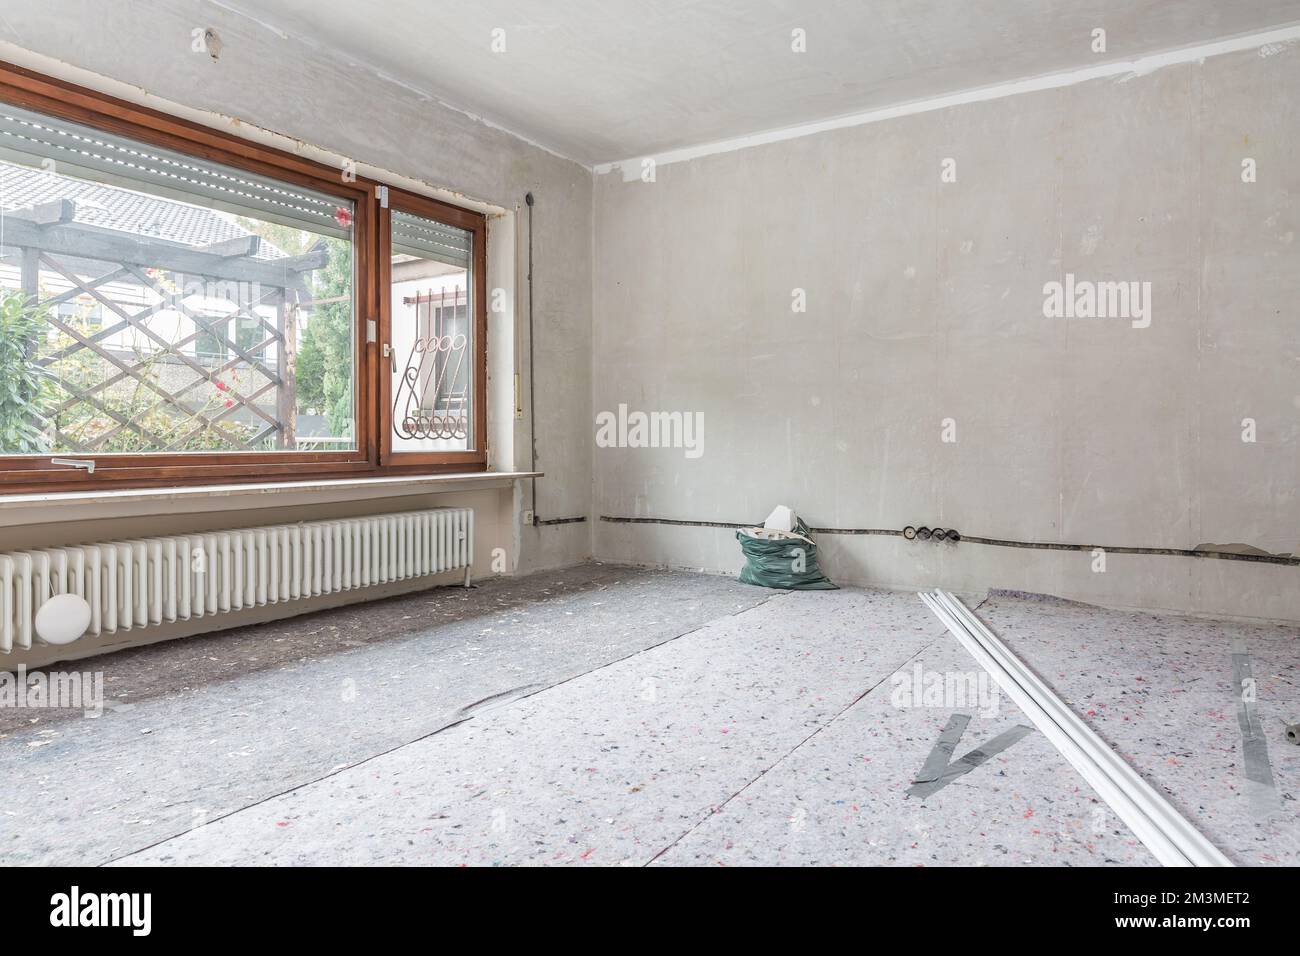 Renovation of old house, room under construction with unpainted walls, old window Stock Photo